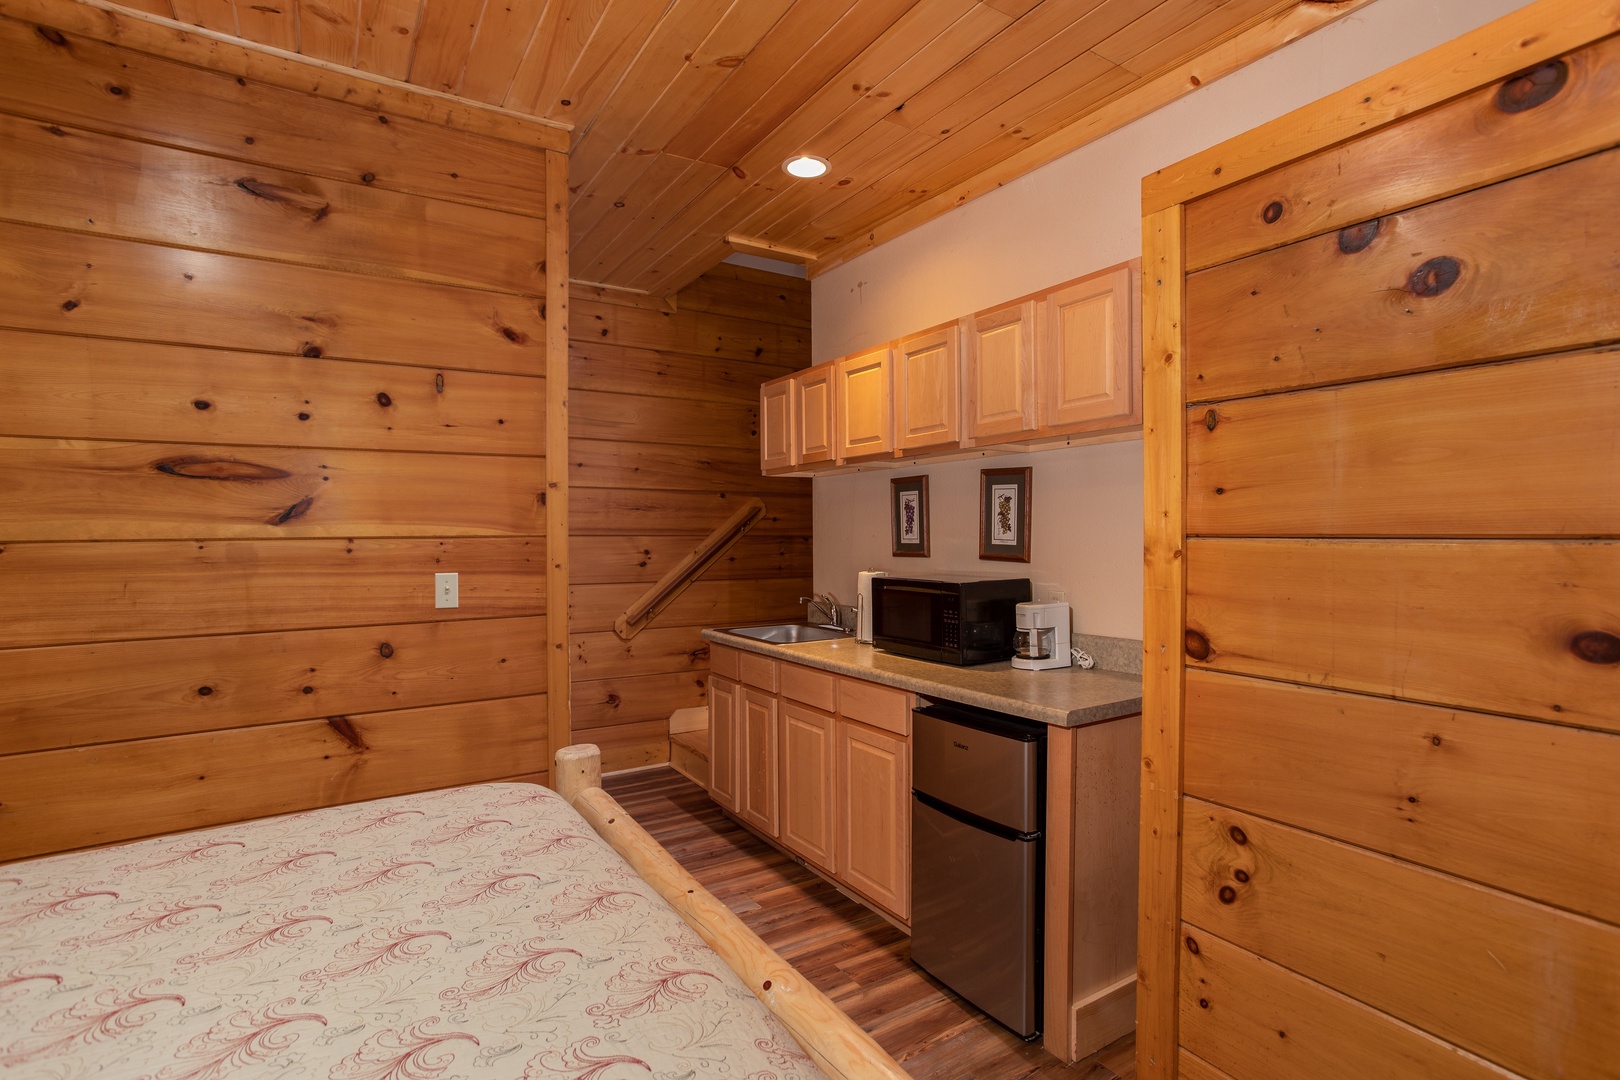 Kitchenette at Starry Starry Night #725, a 2 bedroom cabin rental located in Pigeon Forge